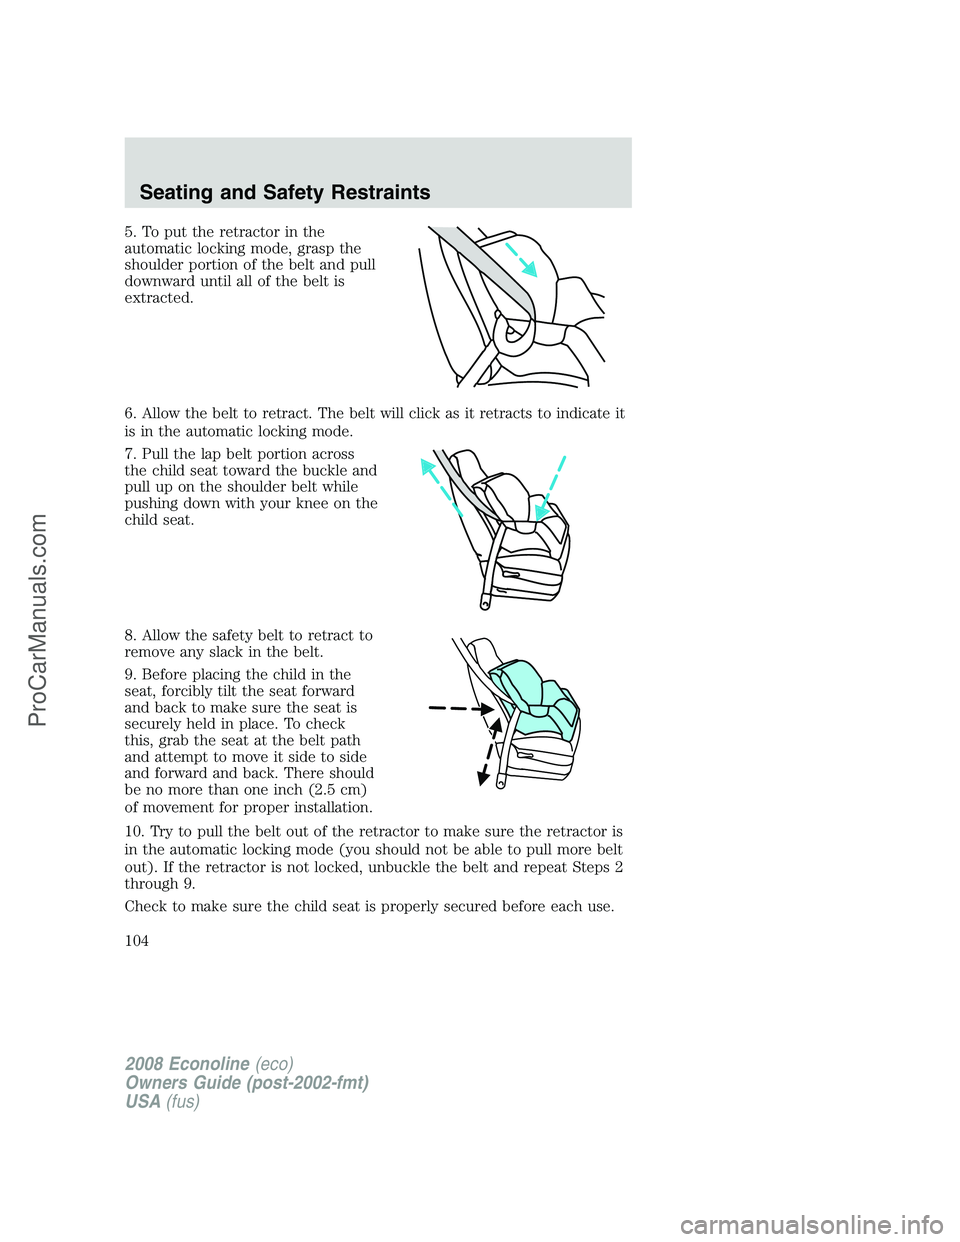 FORD ECONOLINE 2008 Owners Manual 5. To put the retractor in the
automatic locking mode, grasp the
shoulder portion of the belt and pull
downward until all of the belt is
extracted.
6. Allow the belt to retract. The belt will click as